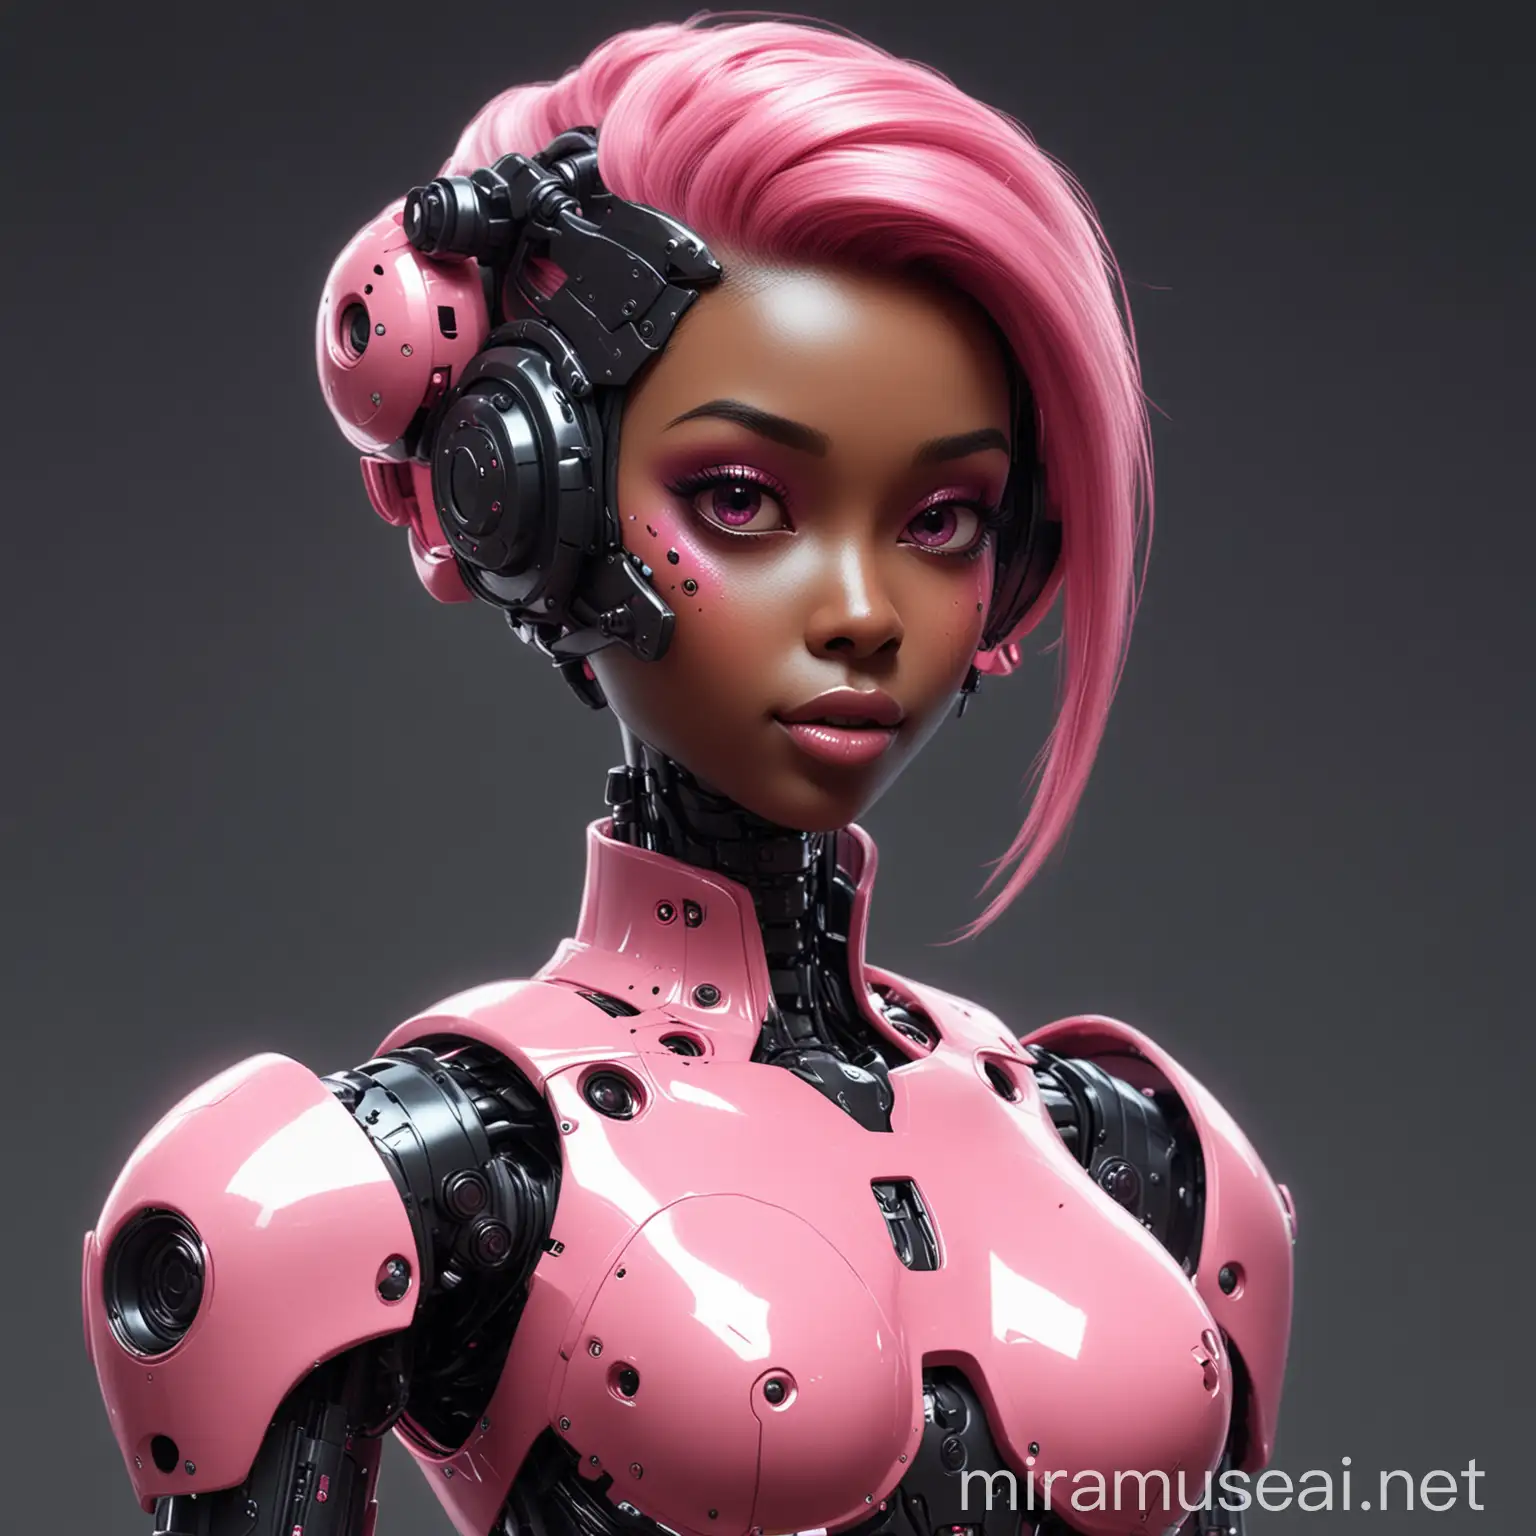 Futuristic Sexy Black Robot Lady with Pink Armor in Pixar Style